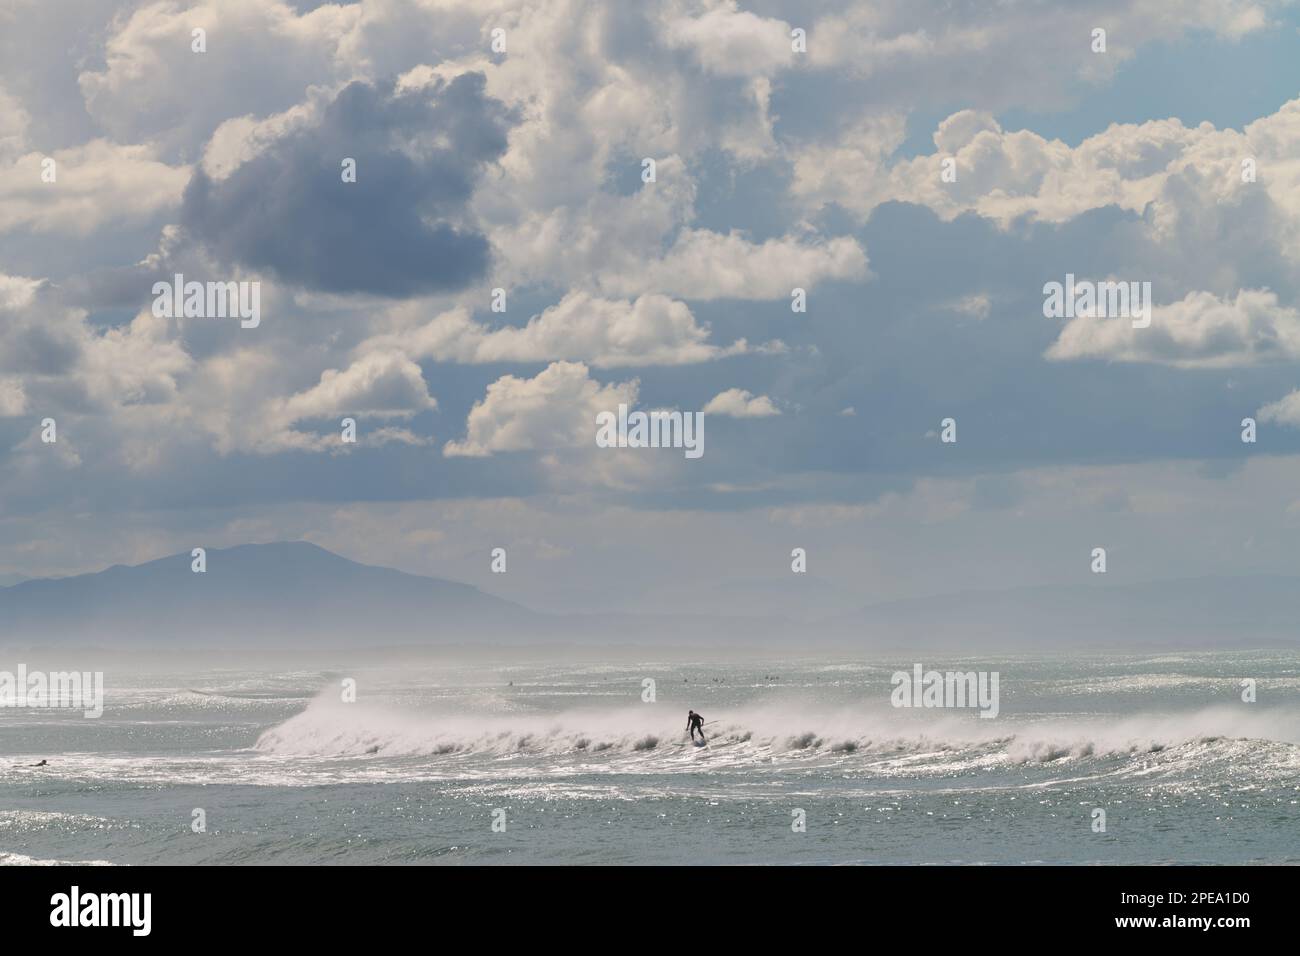 Man surfing a wave in New Zealand using a stand up paddleboard, Pegasus Bay, with Kaikoura in the distance, Christchurch New Zealand. Stock Photo